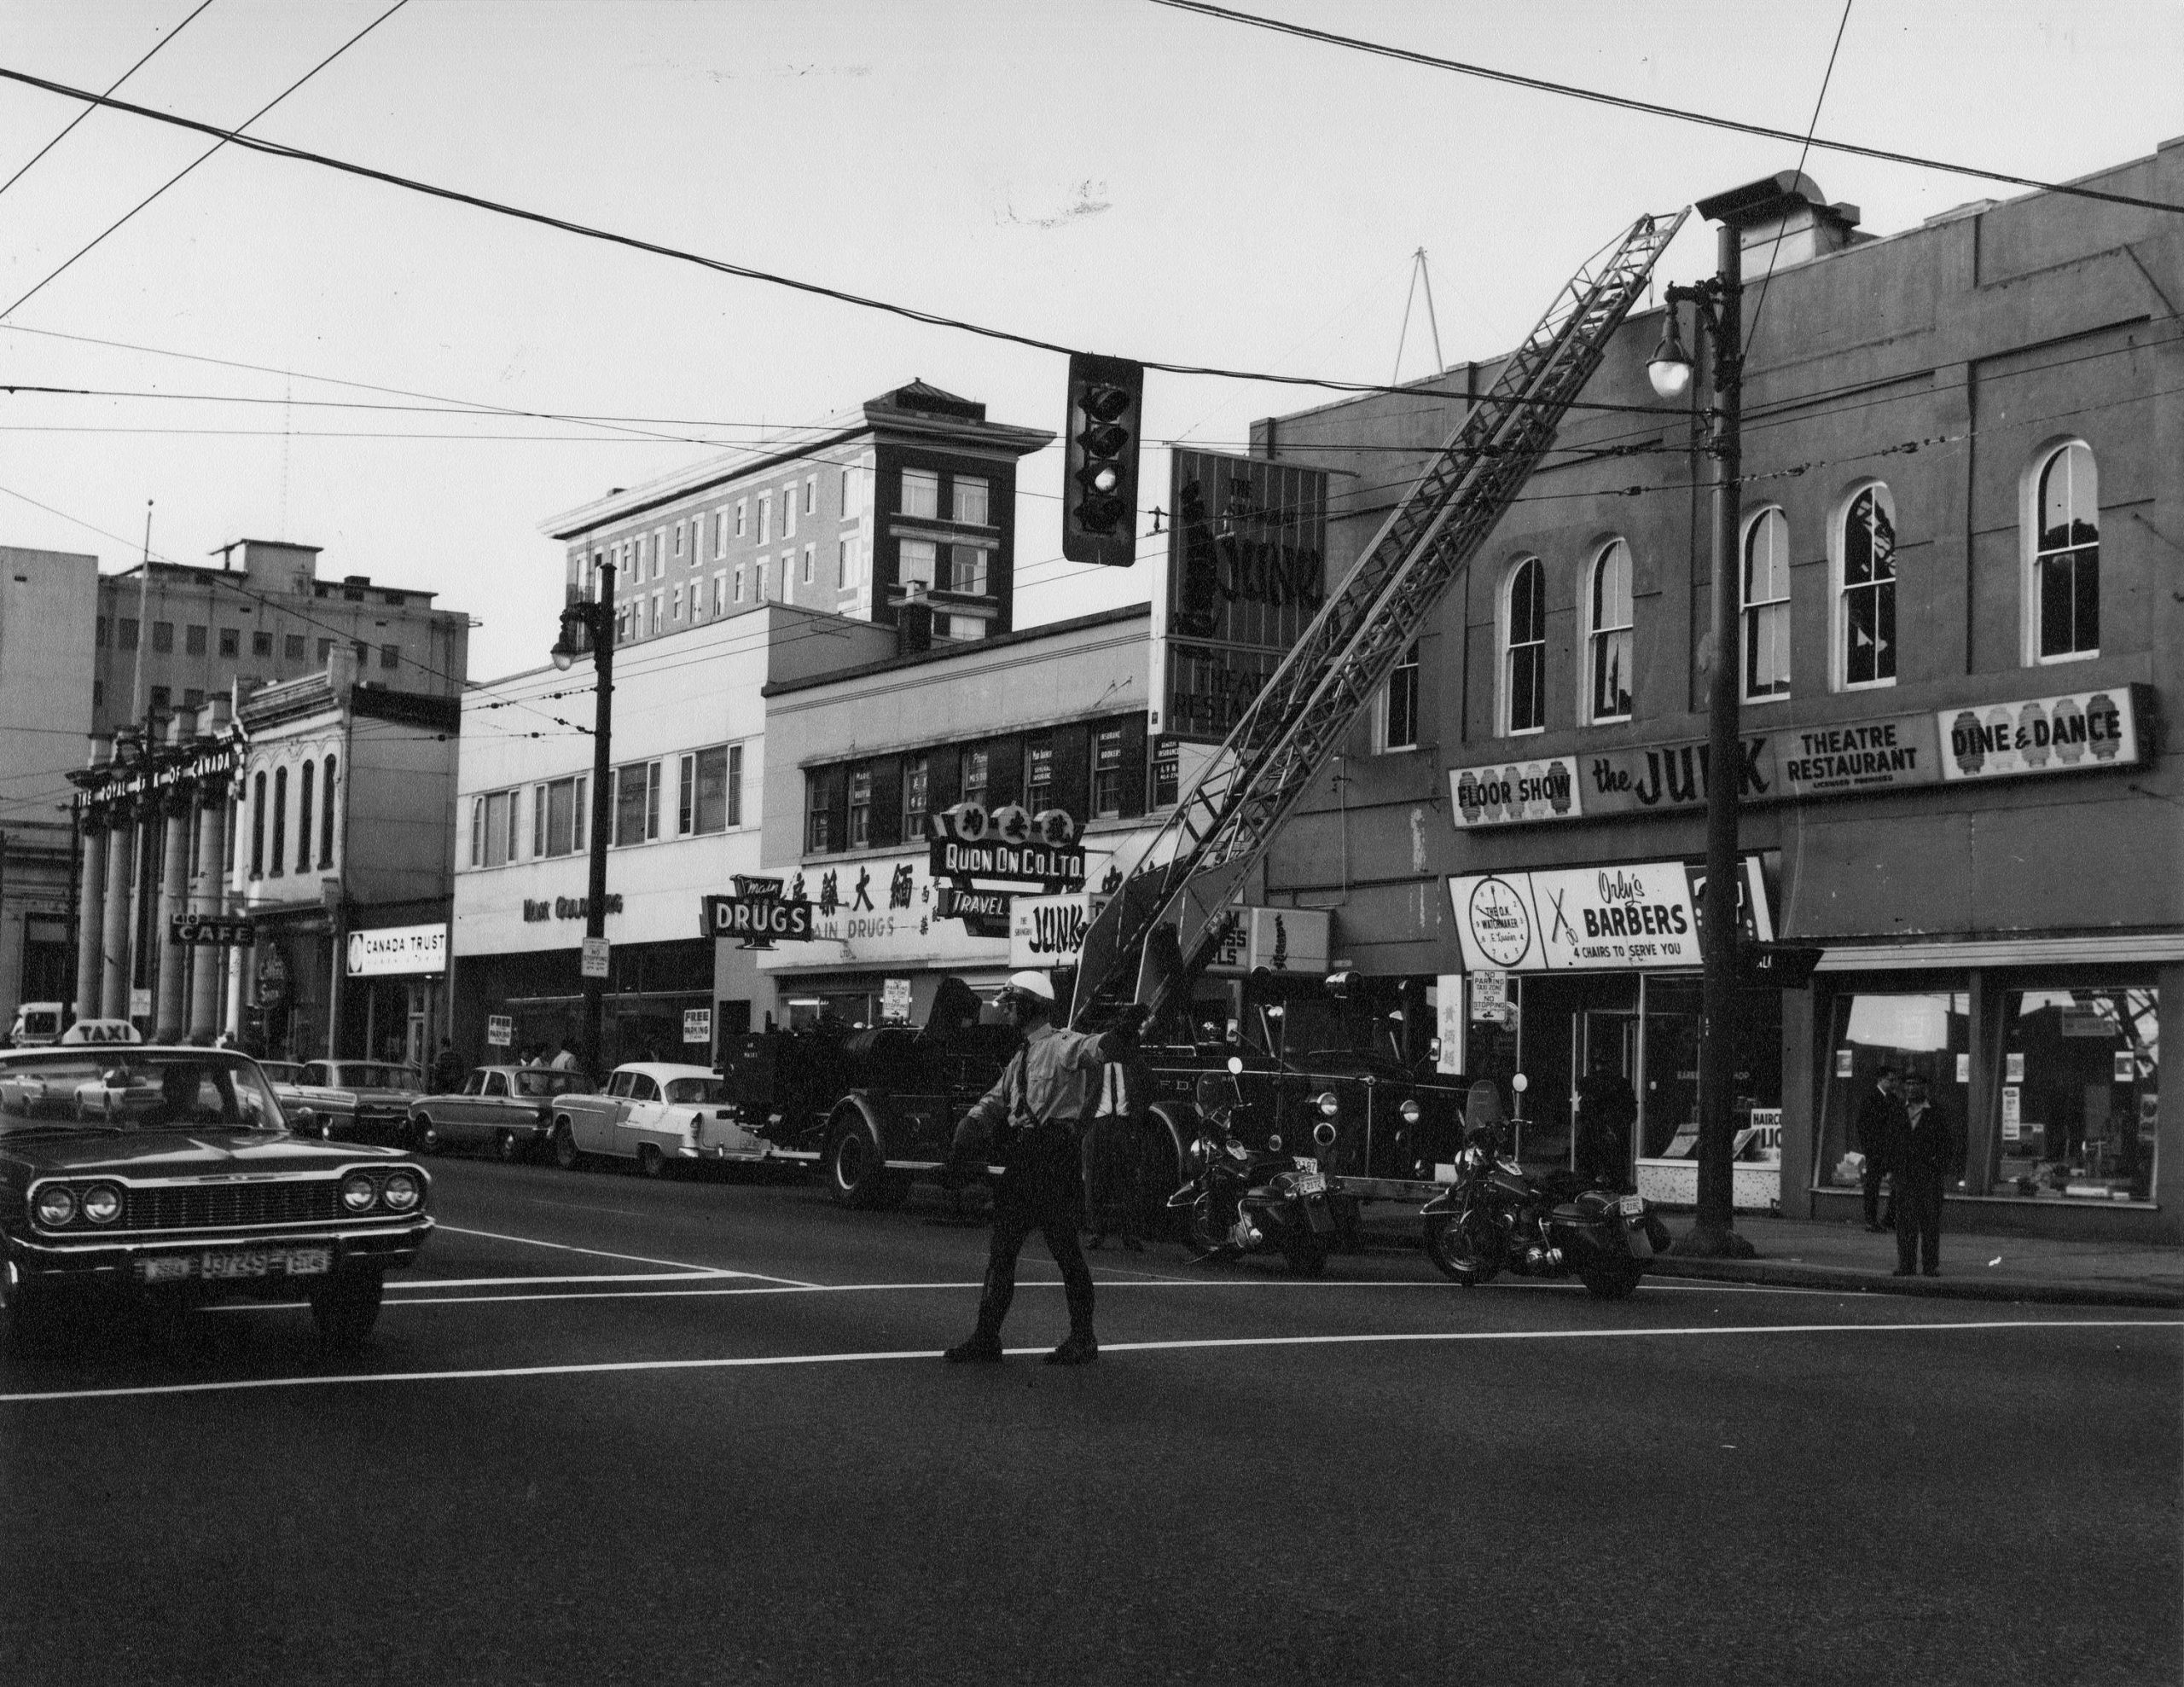 Directing traffic with a fire engine attending a building at Pender and Main, 1967. Reference code: VPD-S214-: CVA 490-273